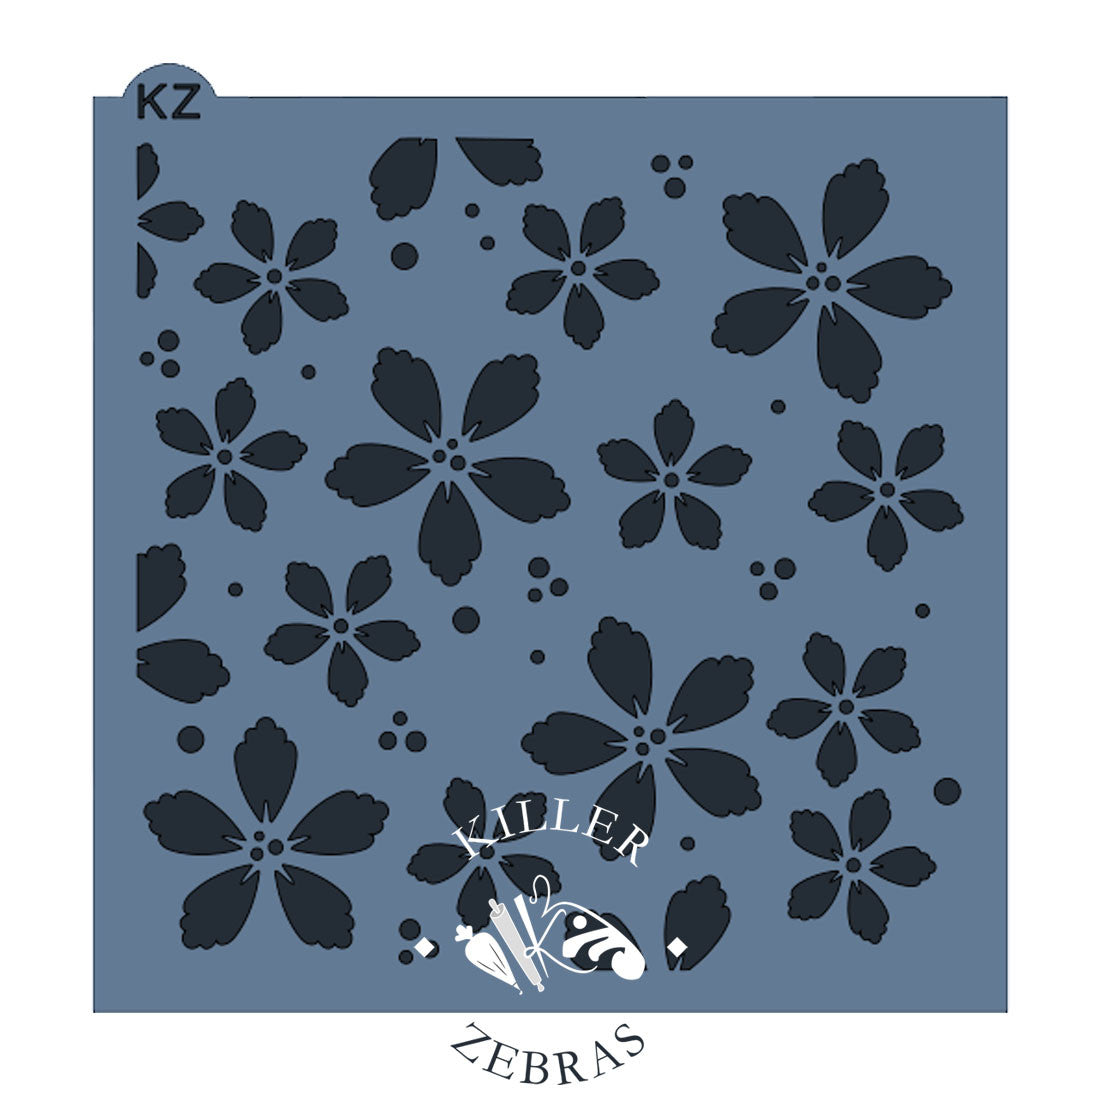 Large, square stencil with 5-petal flowers differing in size. Some smaller circles in the center of each flower and spread out in the empty space.